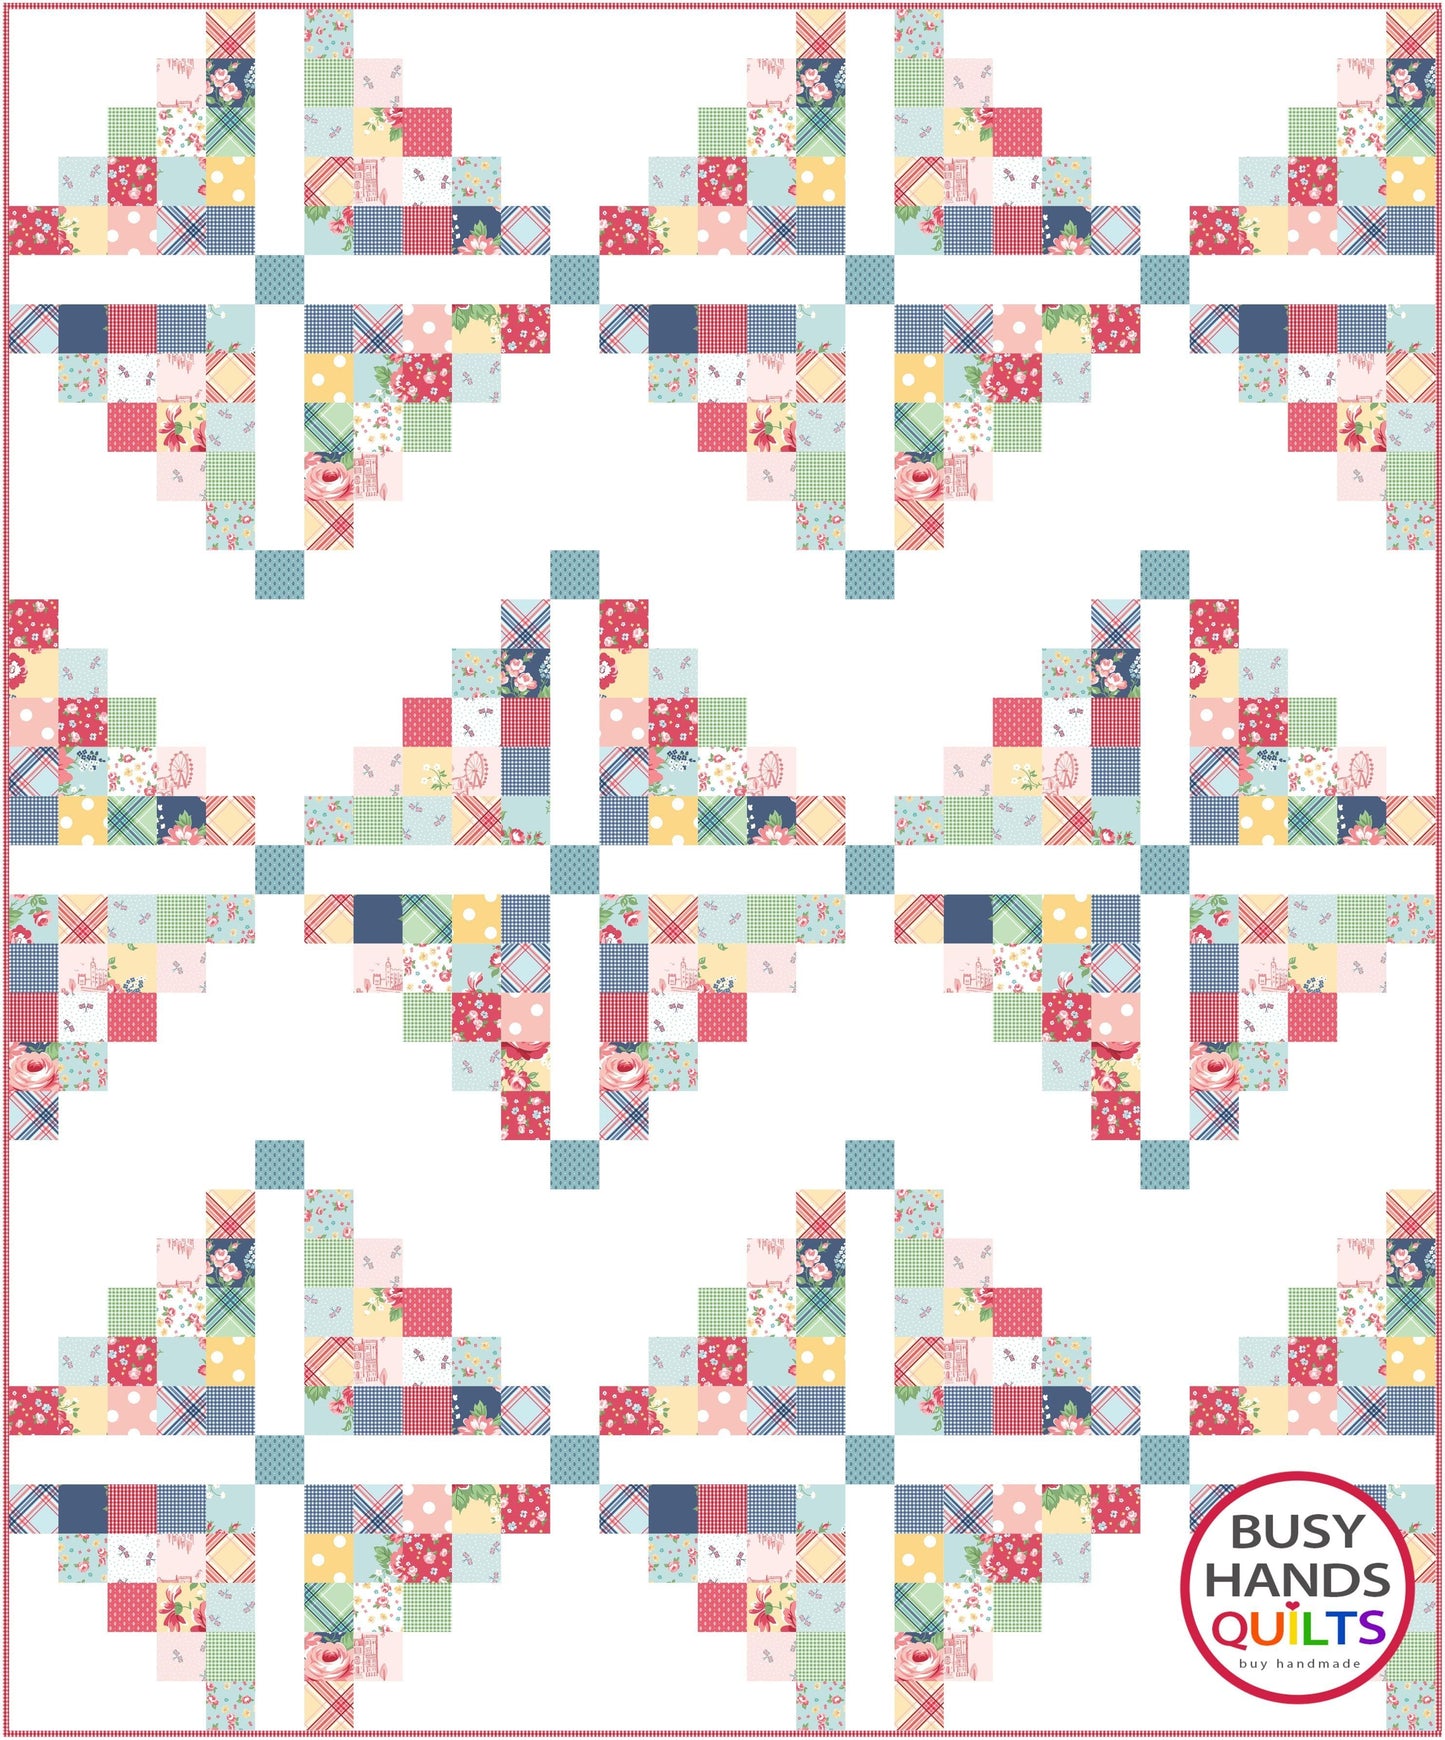 My Farmhouse Quilt Pattern PDF DOWNLOAD Busy Hands Quilts $12.99